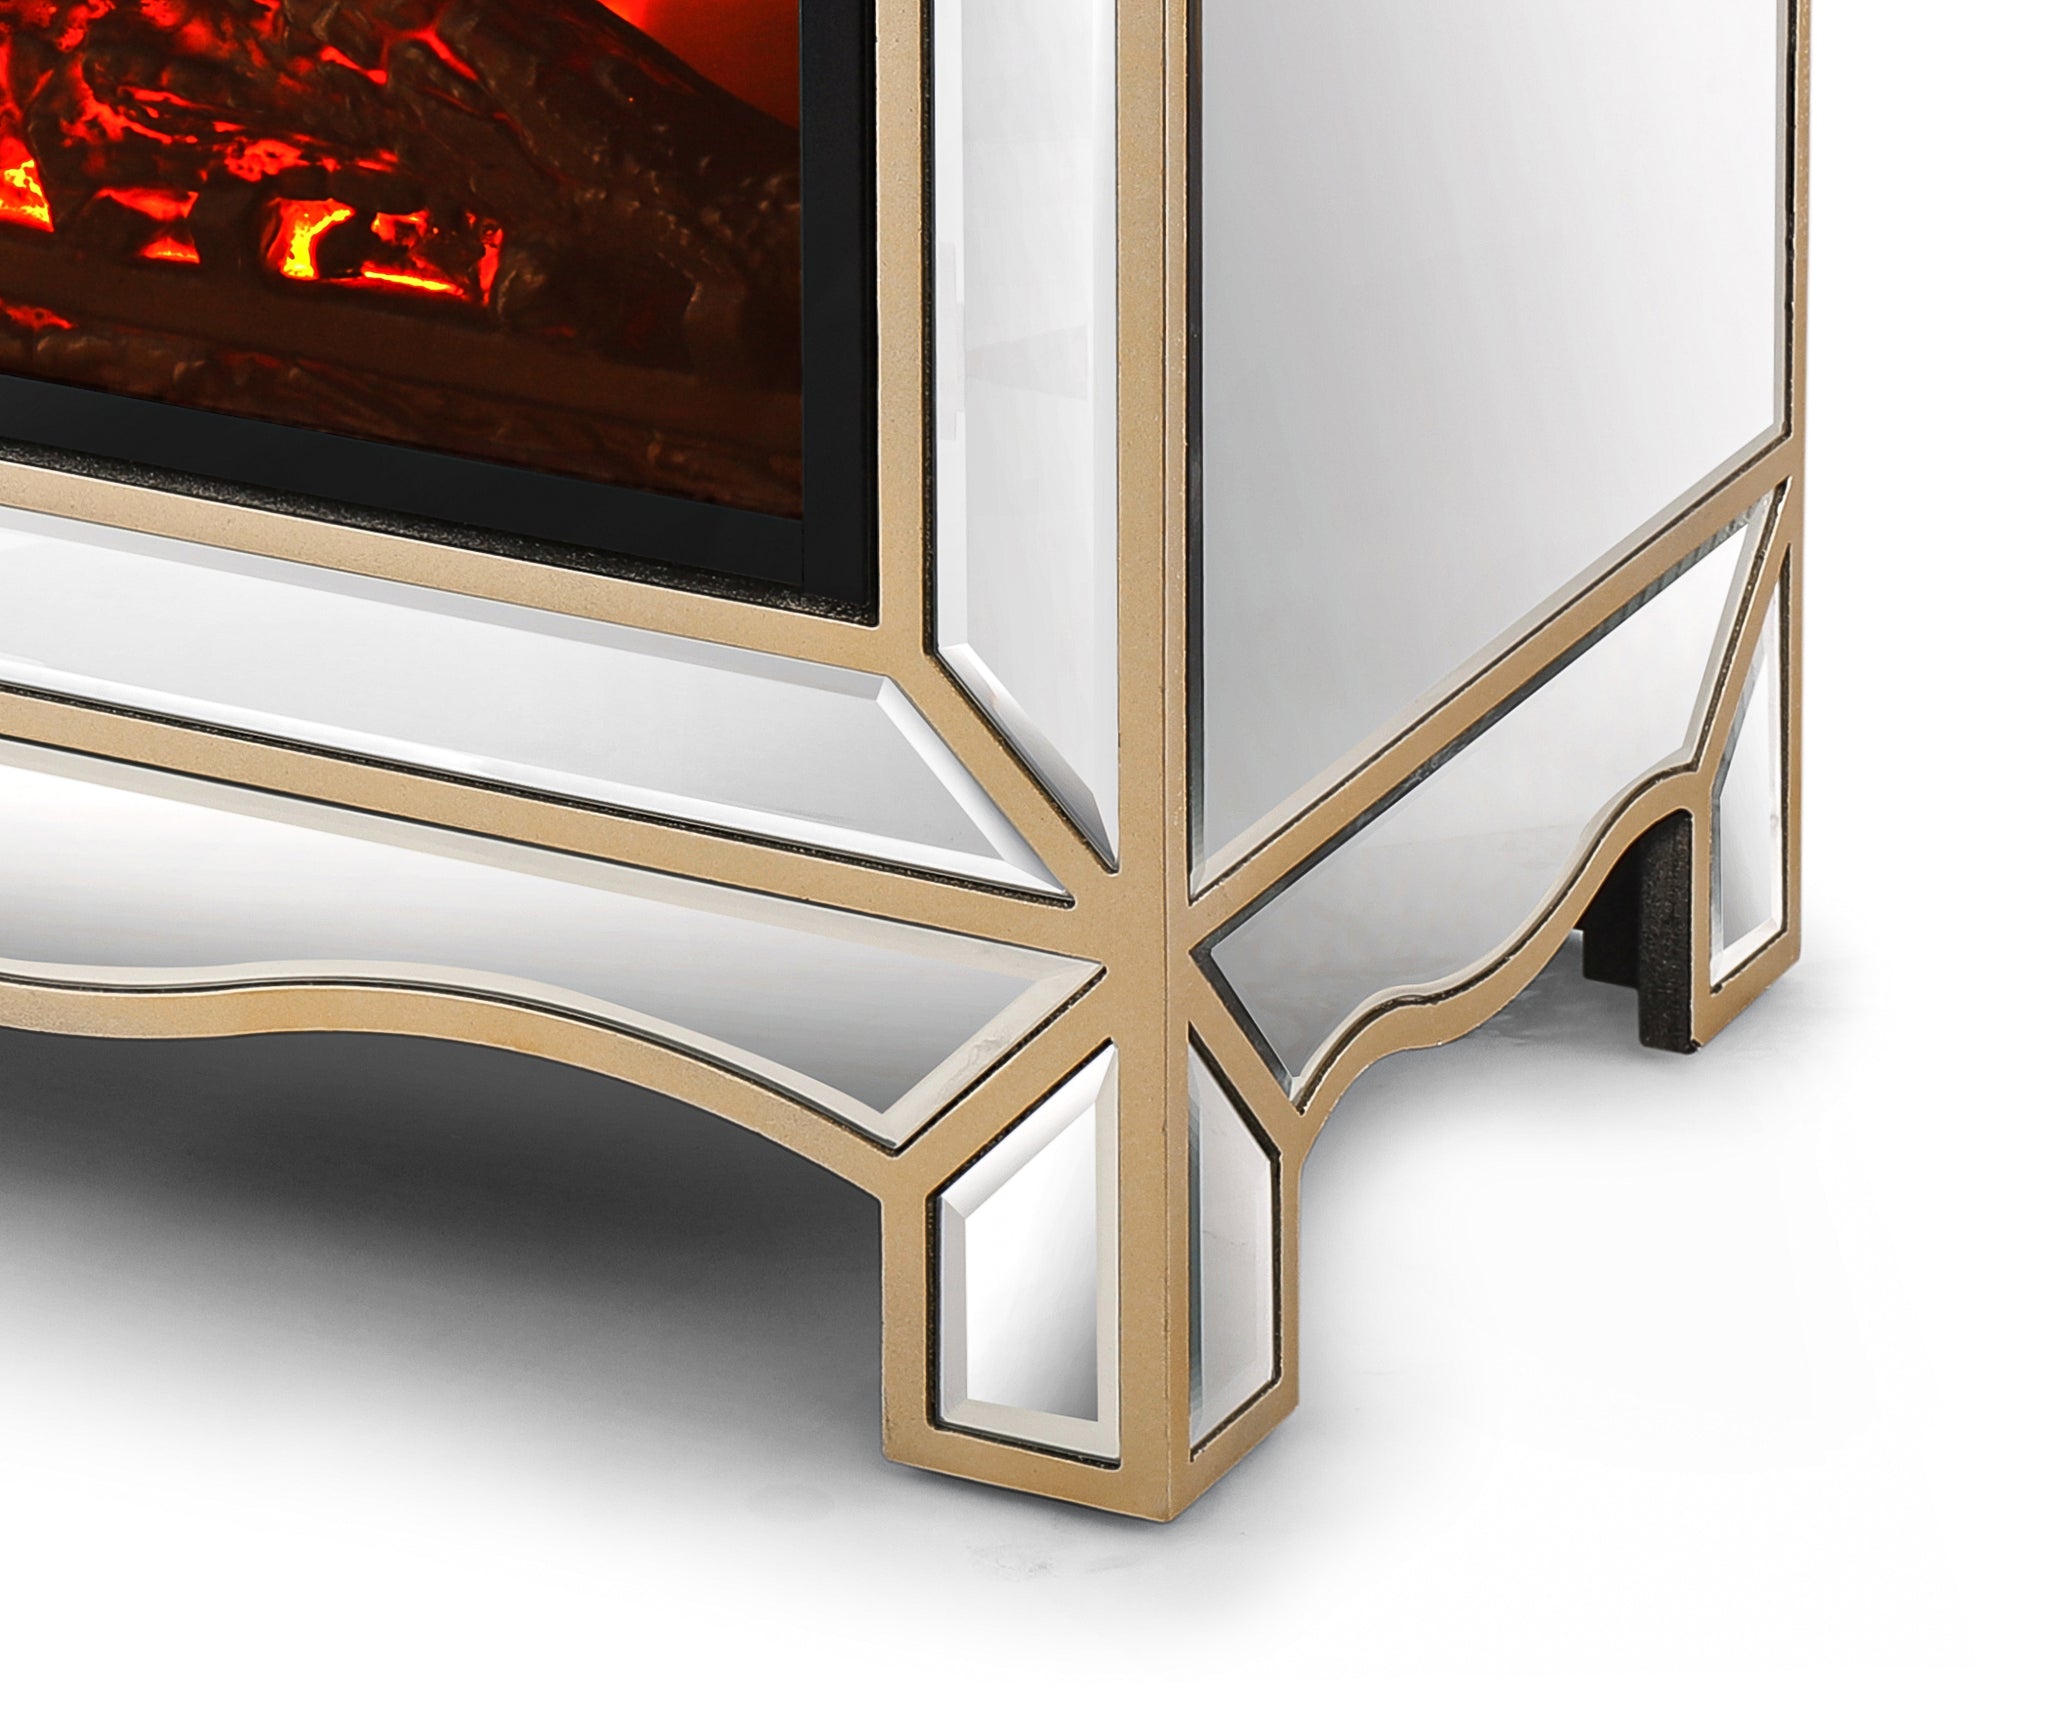 Mirrored mantelpiece with champagne color bezel Built in 1500 function heating